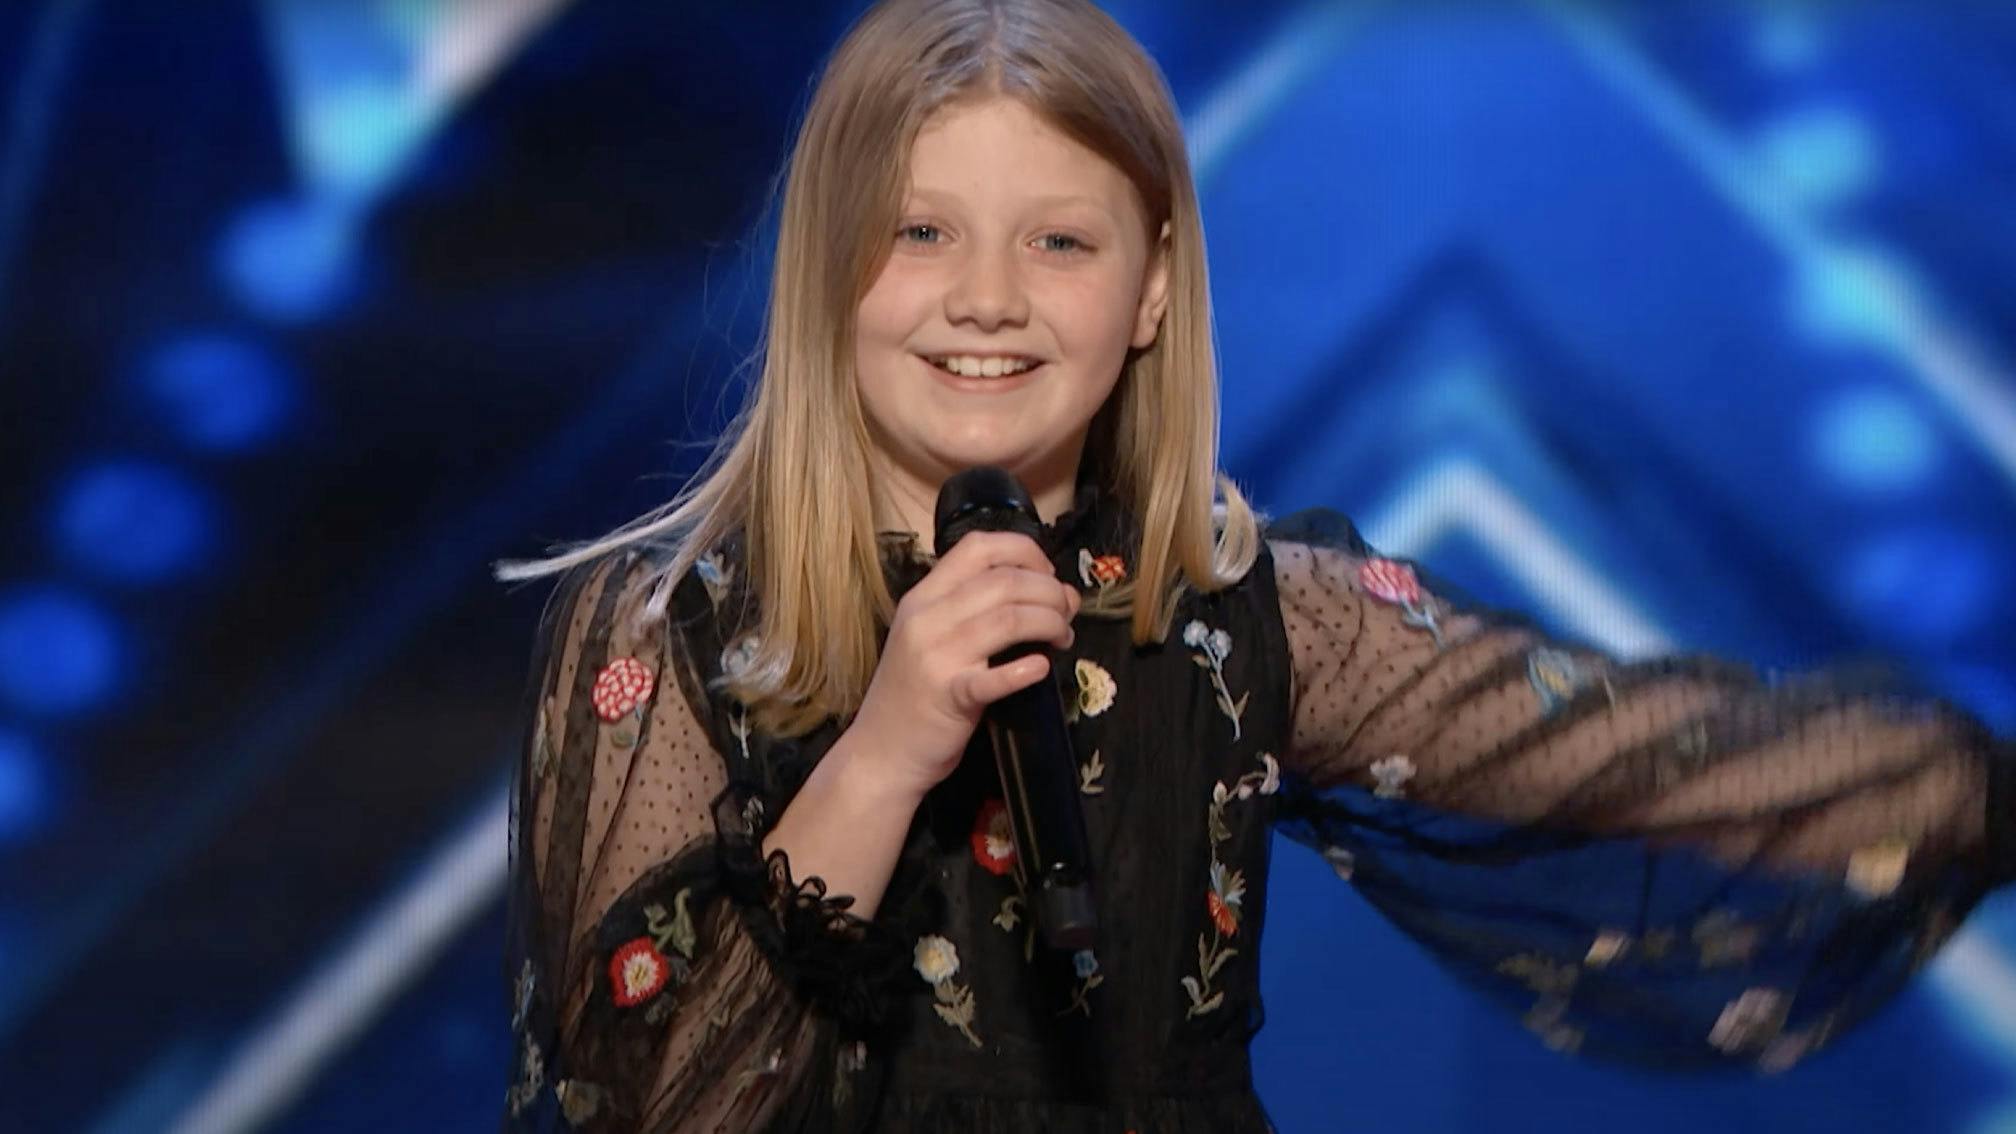 Watch: 10-year-old crushes Spiritbox’s Holy Roller on America’s Got Talent